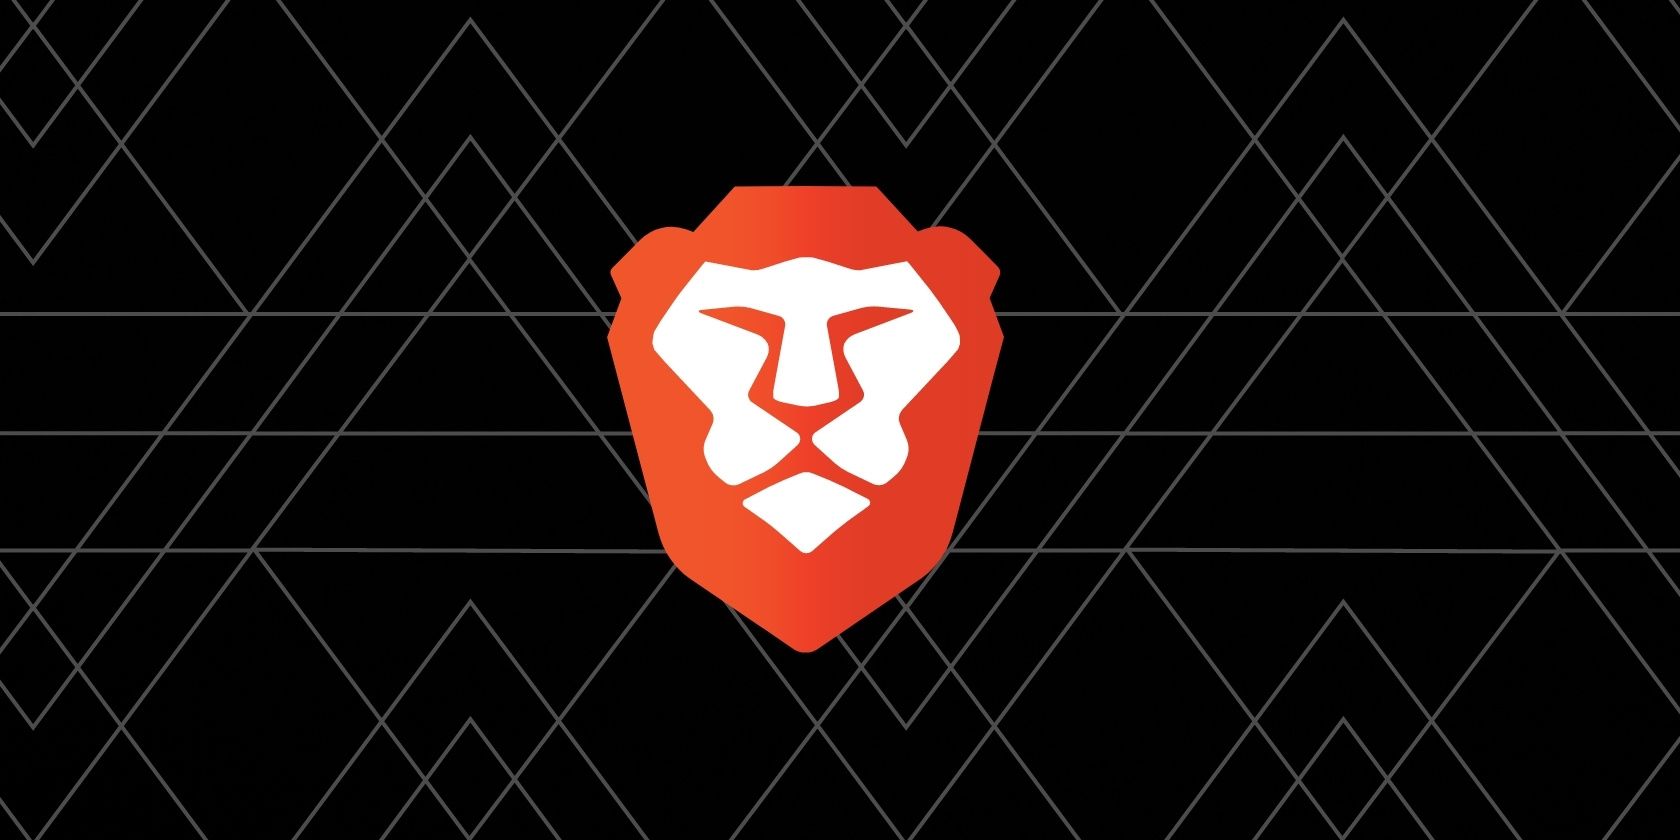 Brave Replaces Google With Its Own Search Engine: What This Means for Users